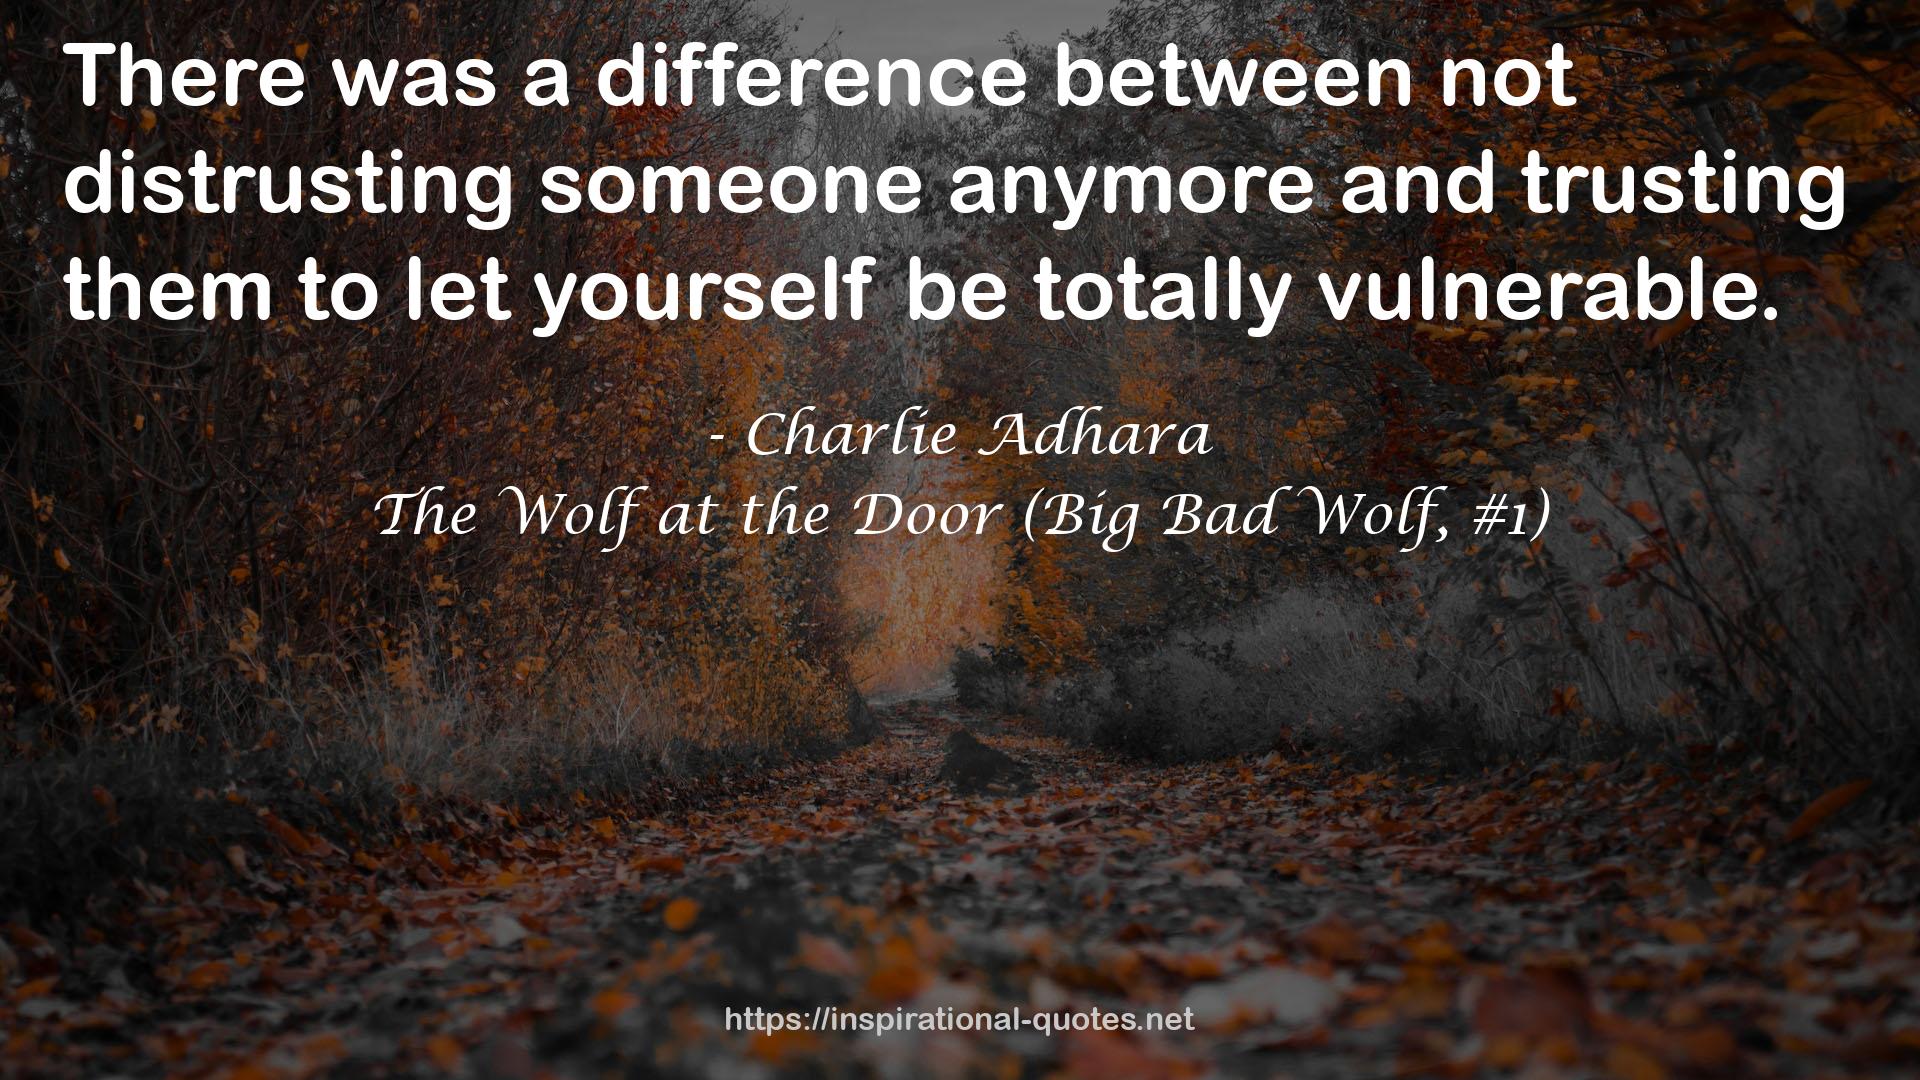 The Wolf at the Door (Big Bad Wolf, #1) QUOTES